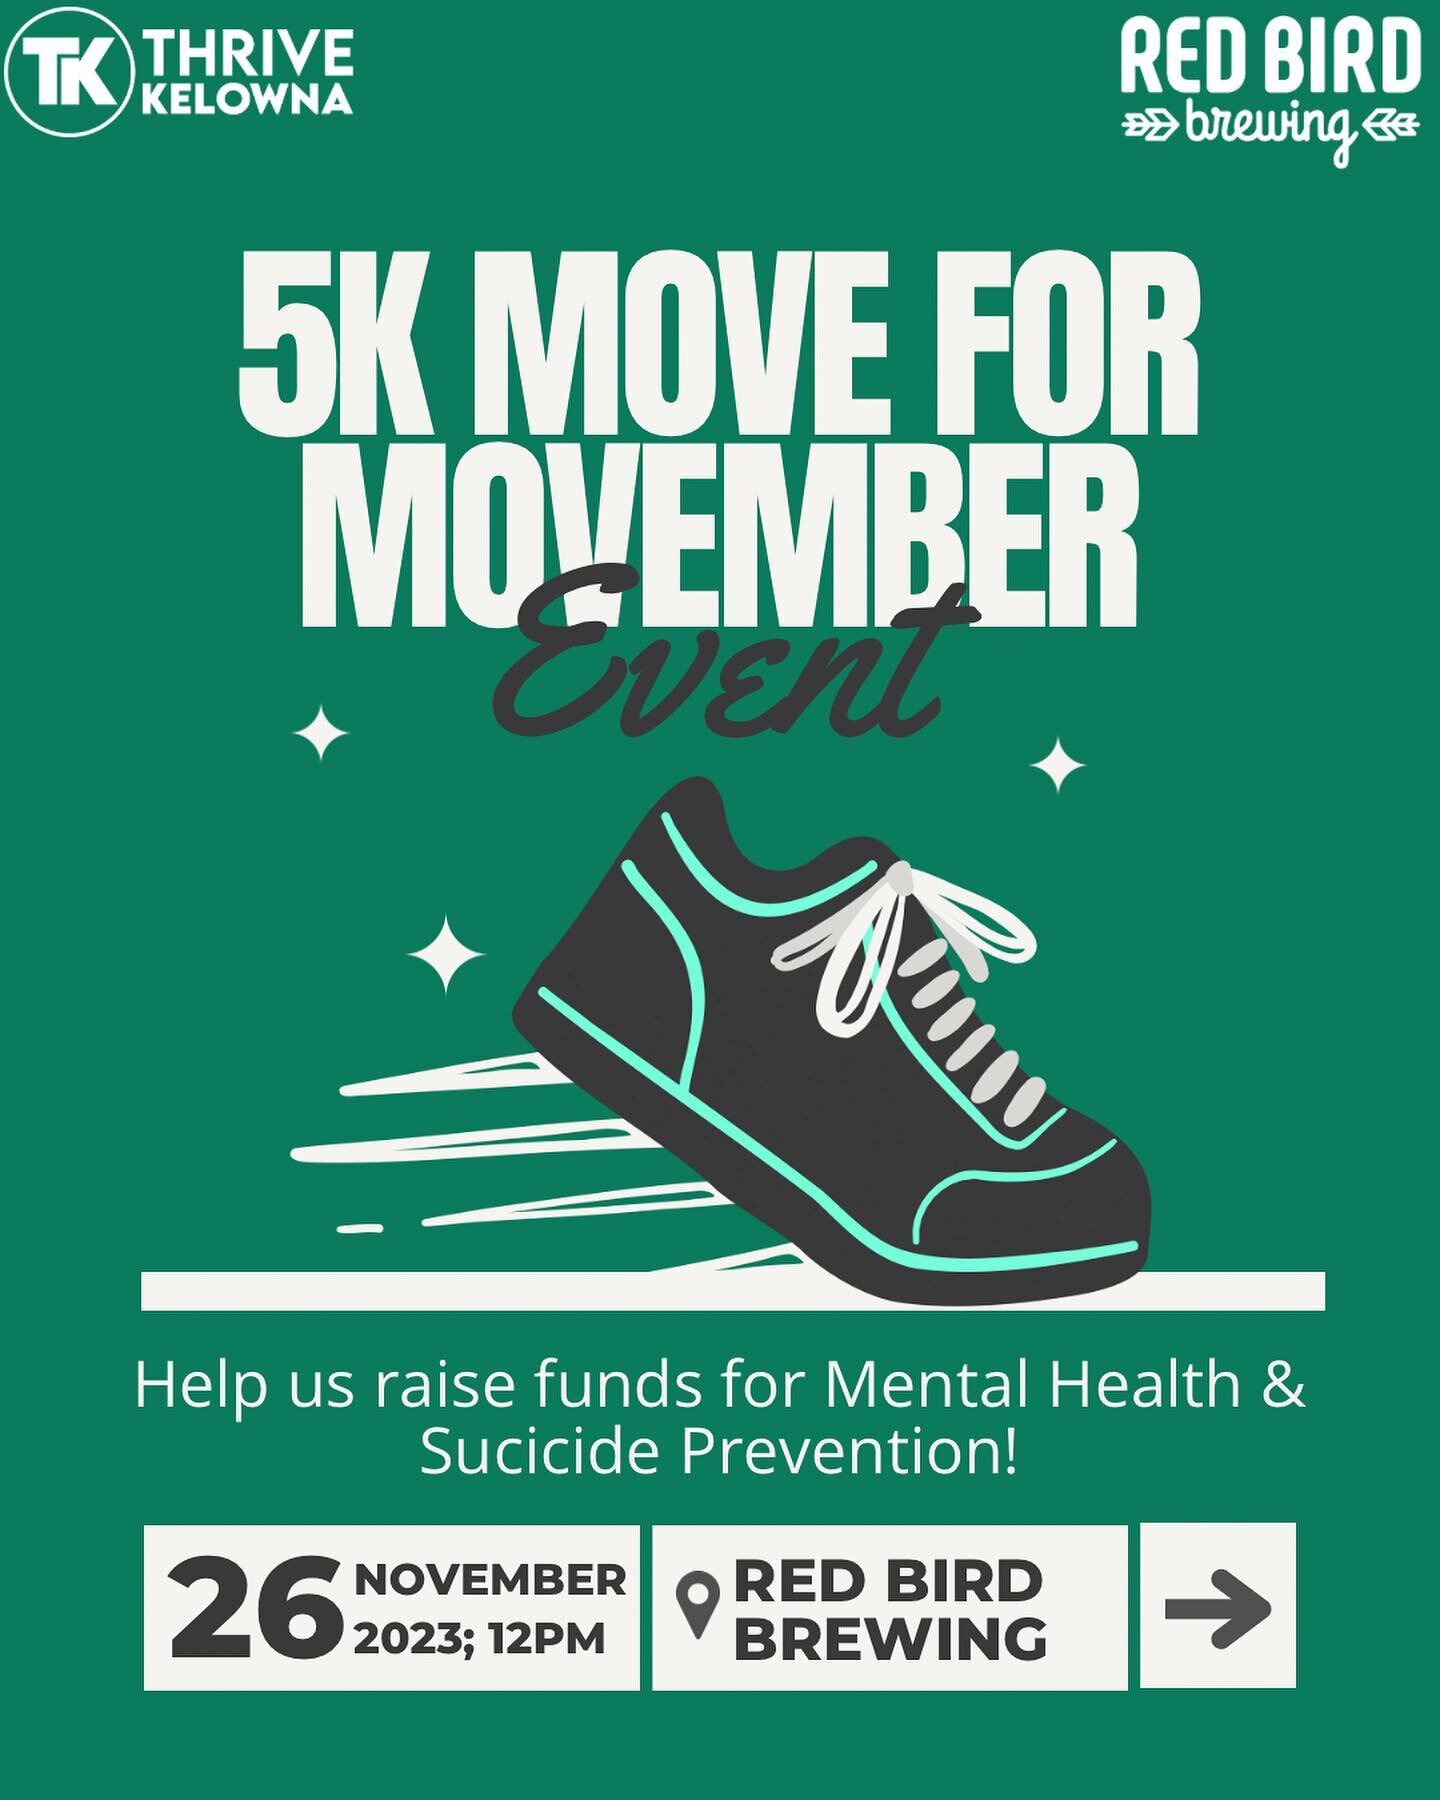 Come out to our @movember event in 2 weeks!
.
We&rsquo;ve teamed up with @redbirdbeer to raise awareness and funds for Movember.
.
We&rsquo;re going to be hosting a 5K walk or run, starting and ending at Red Bird, followed by a raffle, silent auction